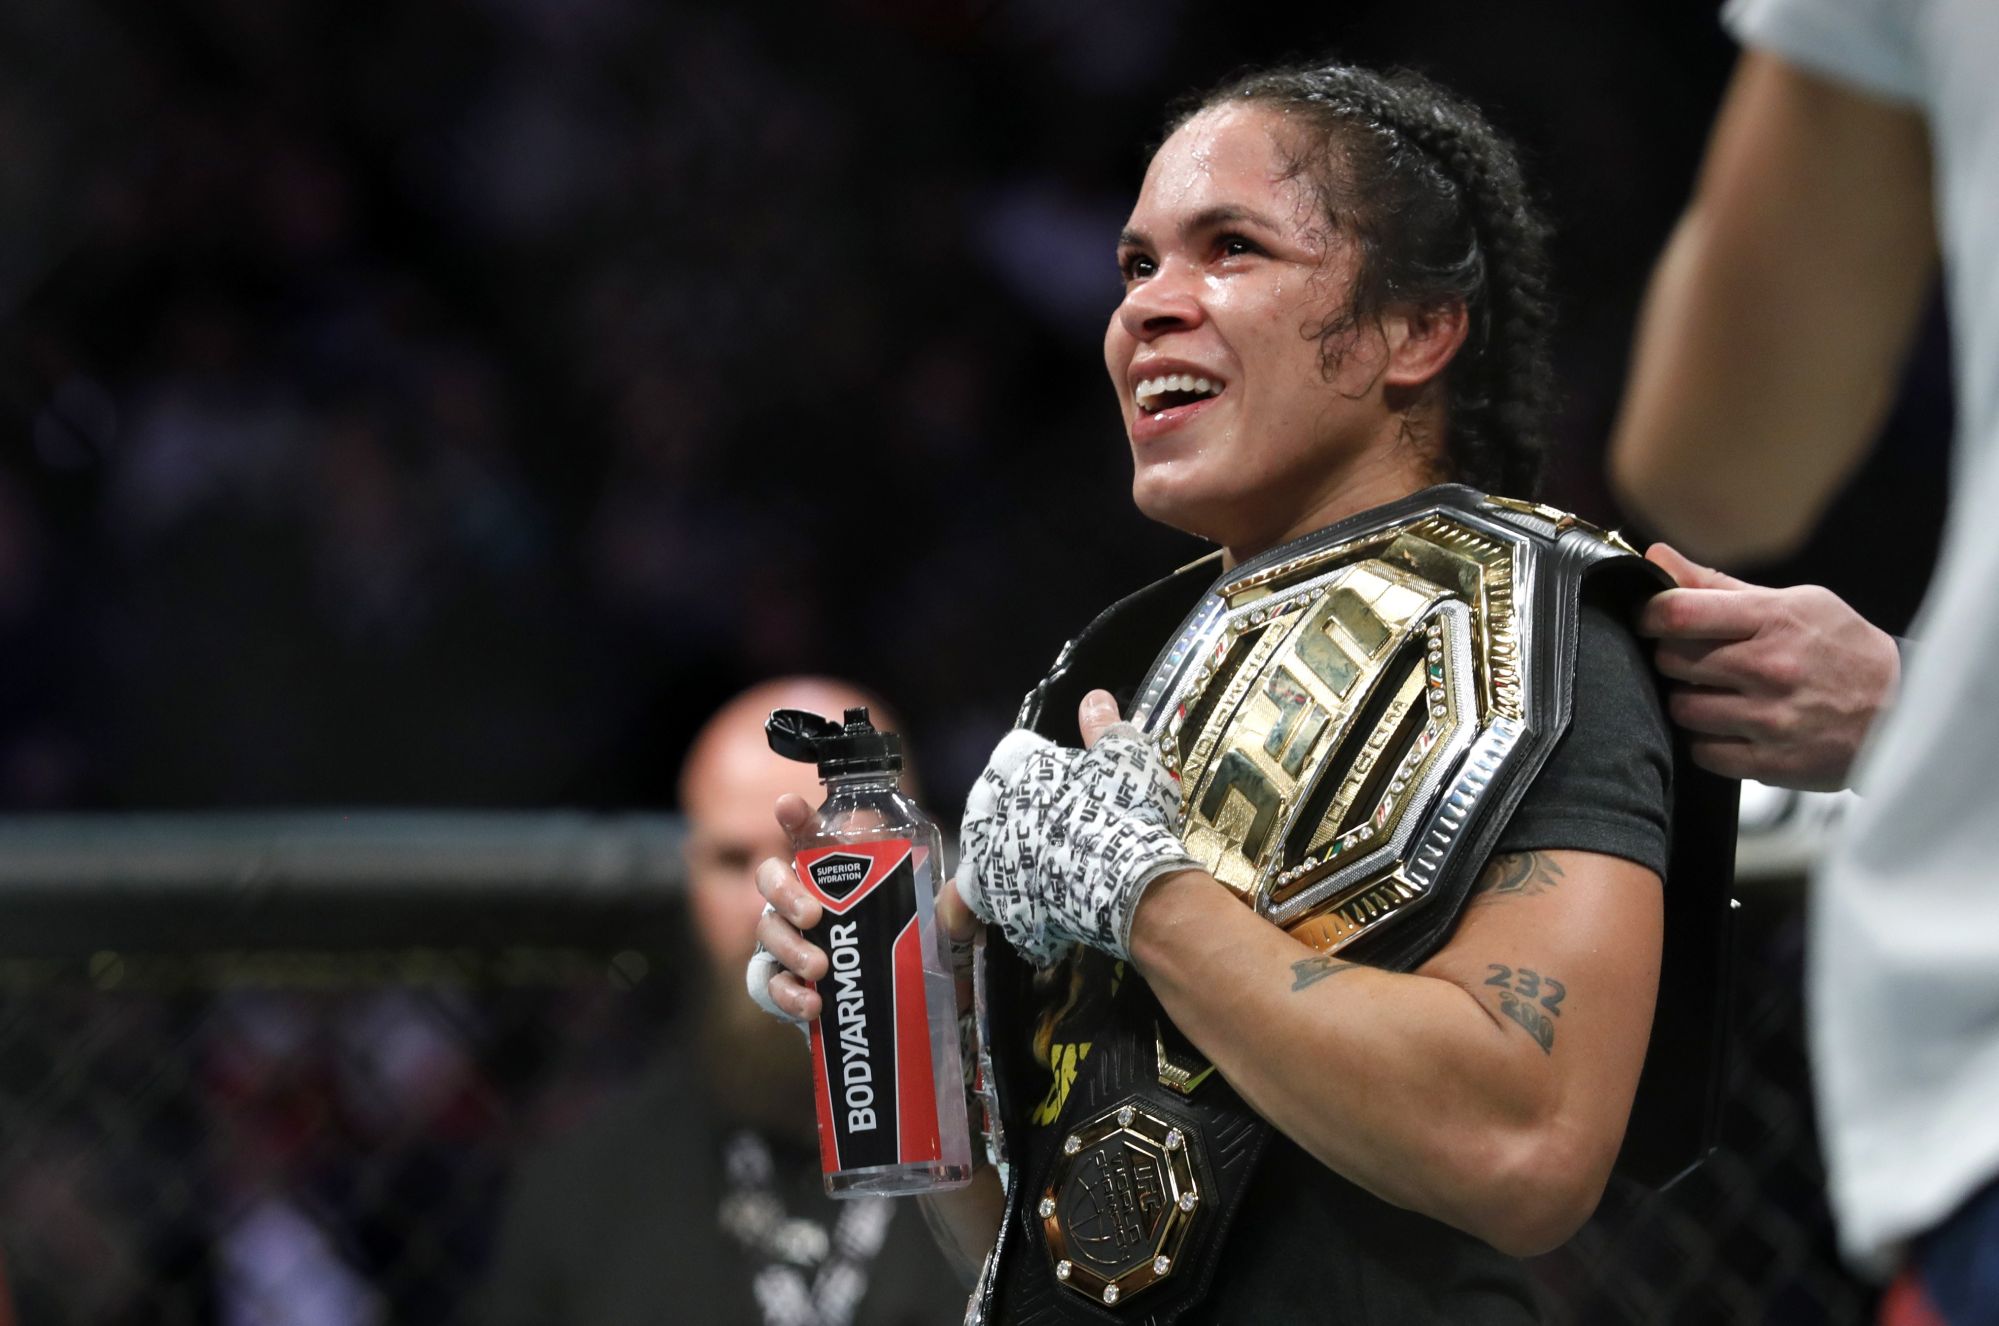 Amanda Nunes Is Ufcs First Openly Lesbian Fighter 7 Things To Know About The Lgbt Double